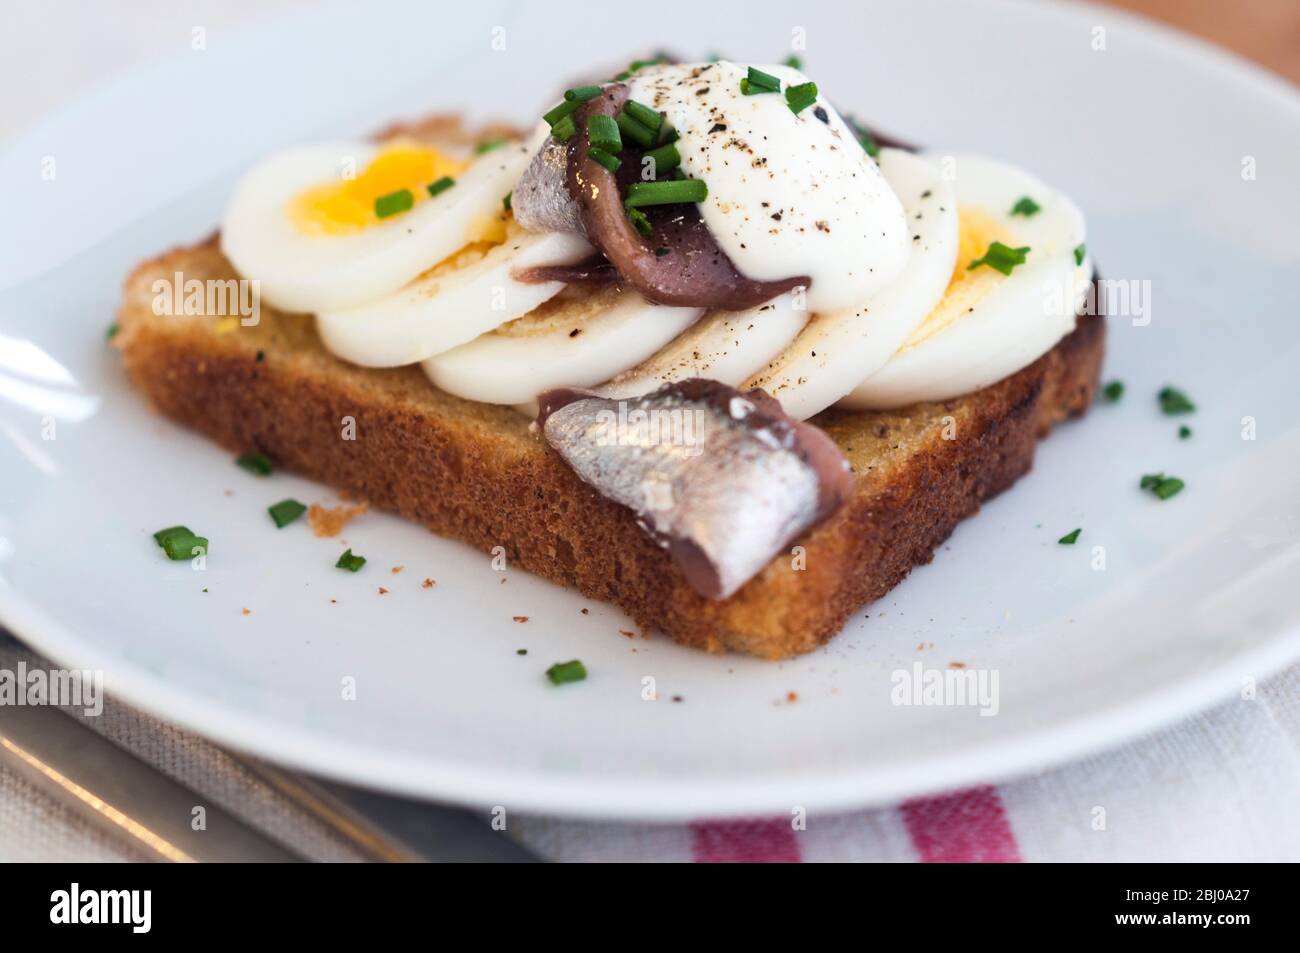 A Swedish classic open faced sandwich with sliced, hardboiled egg, topped with canned Swedish ansjovis (pickled sprats) sprinkled with chopped chives. Stock Photo